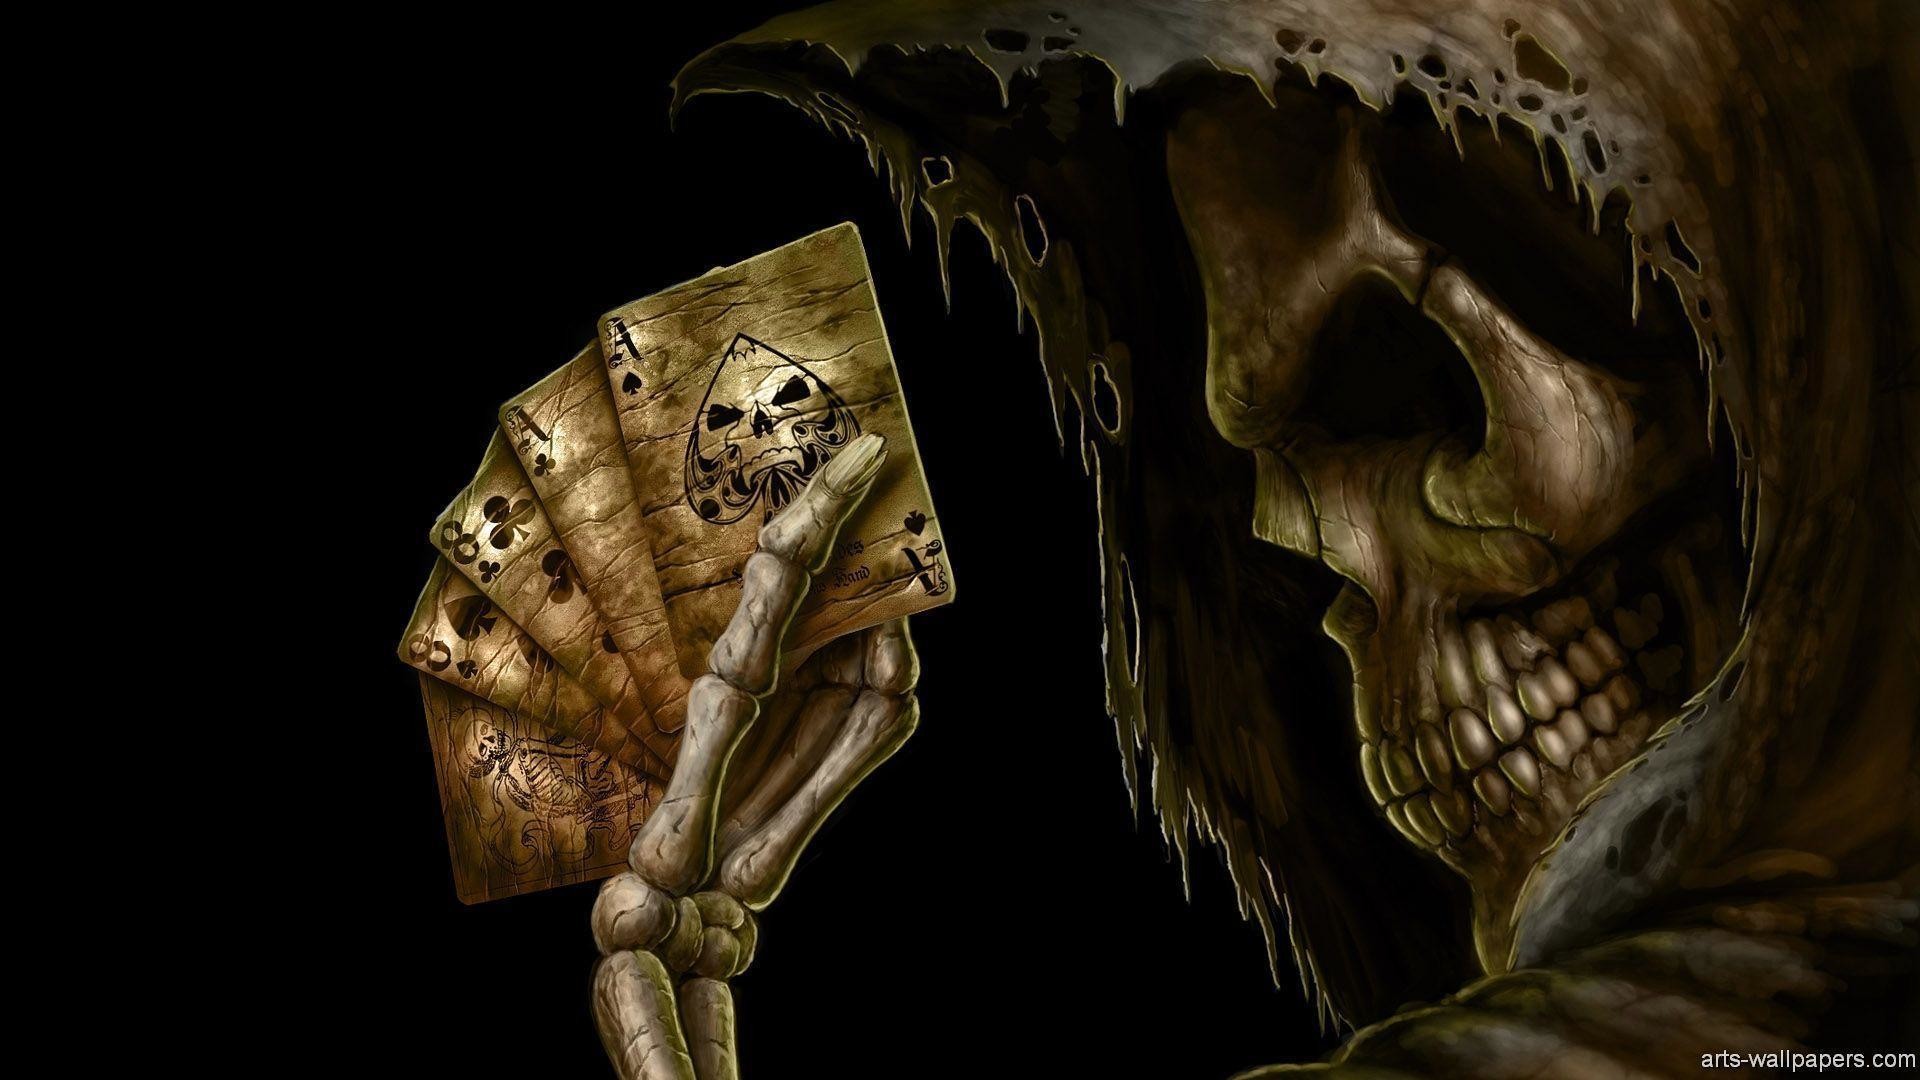 1920x1080 Cool Skull Wallpapers 6267 Wallpapers HD | colourinwallpaper.